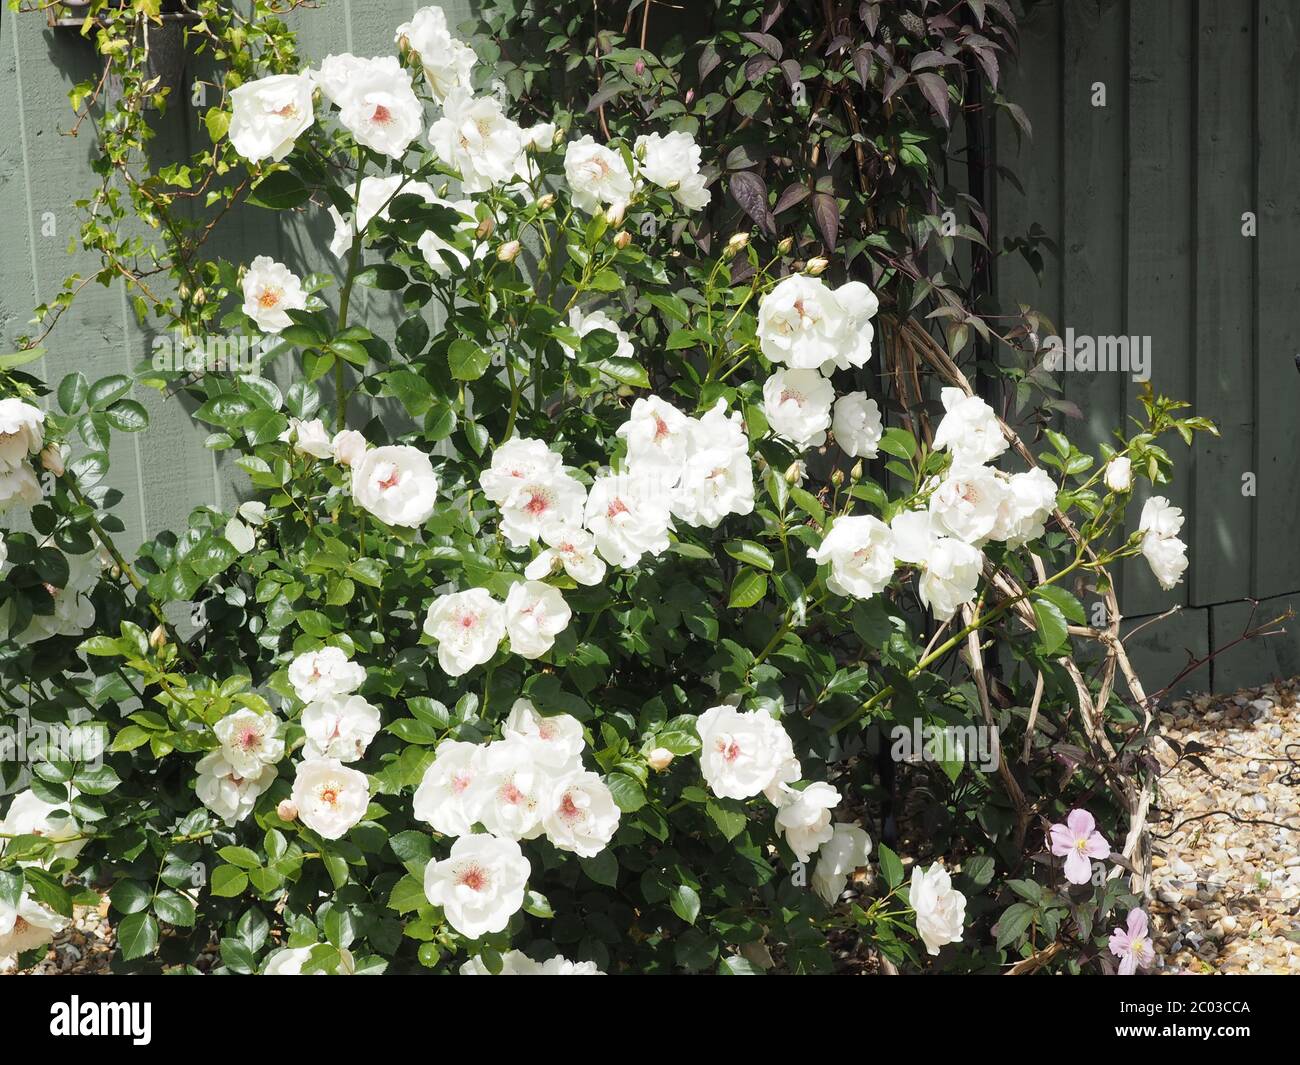 Climbing rose with white flowers "Jacqueline Du Pre Stock Photo - Alamy